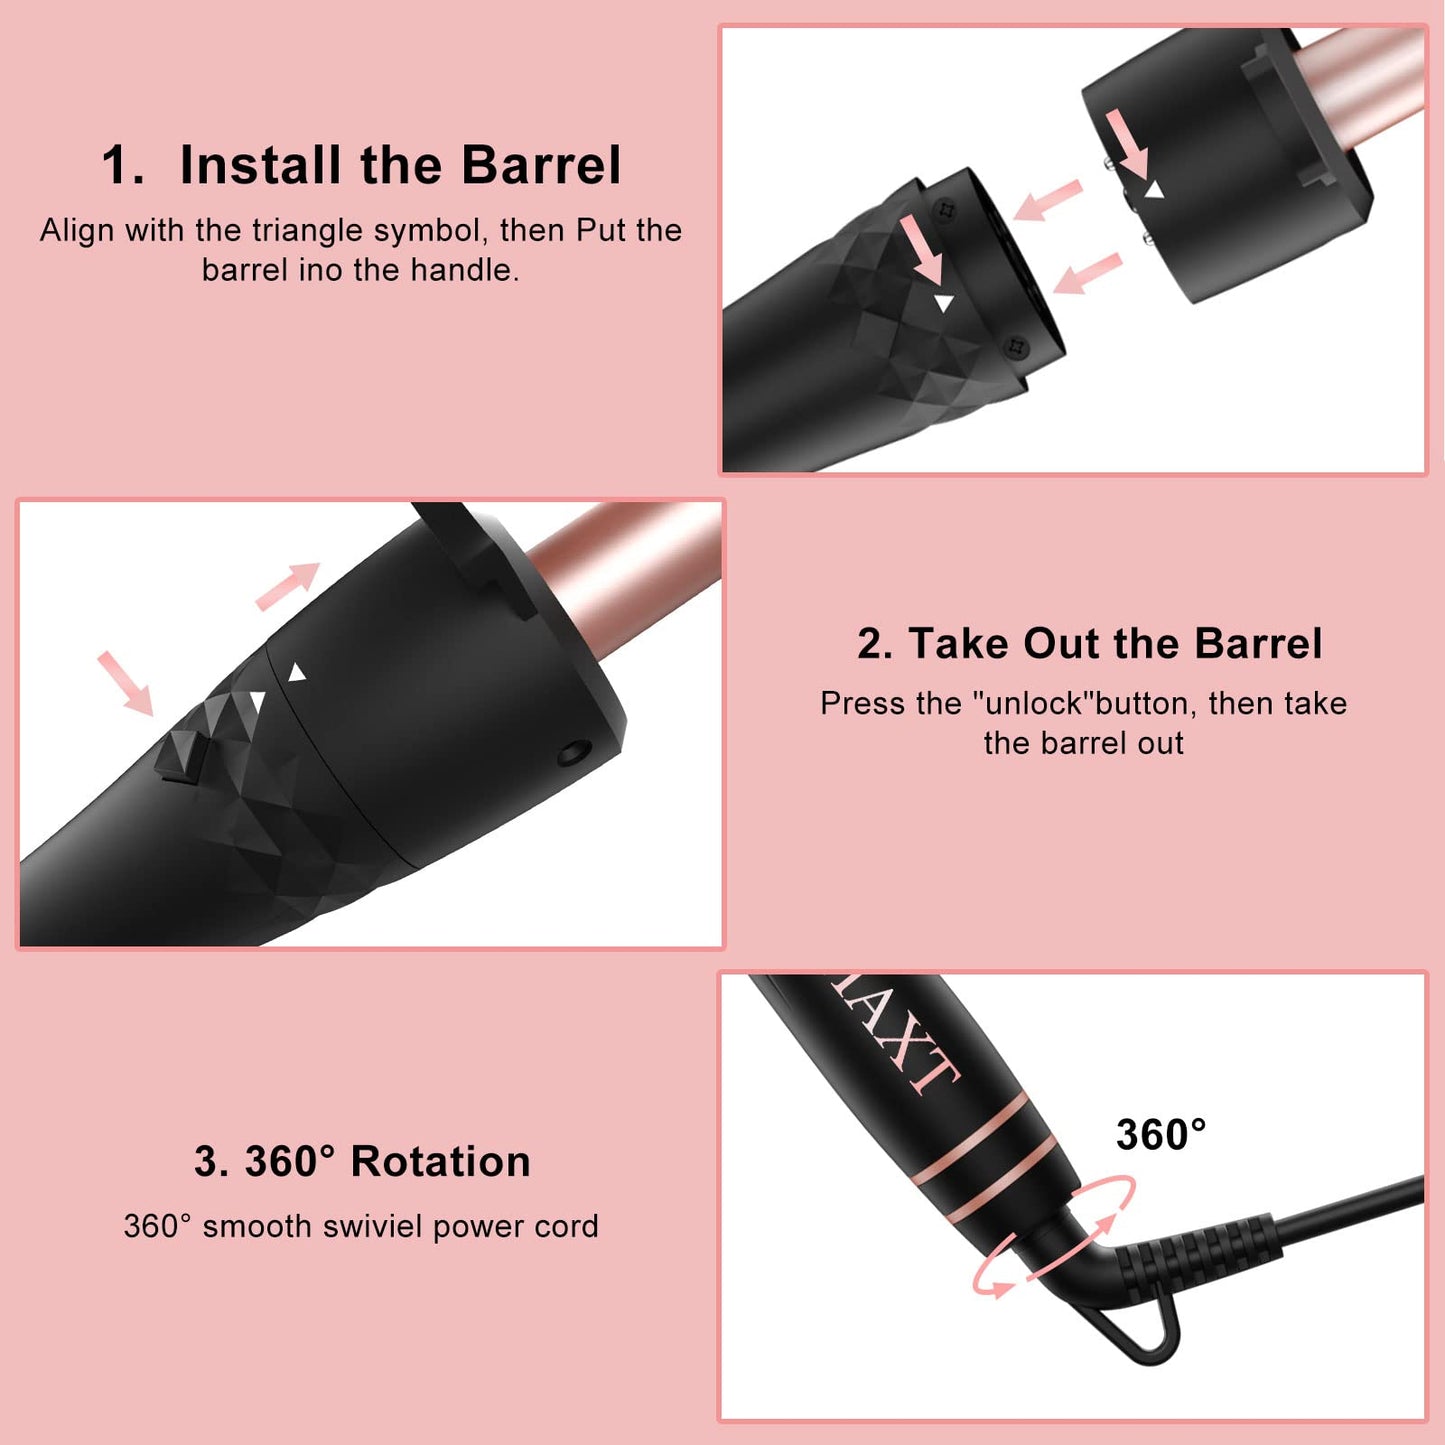 Curling Iron Set 5 in 1,MAXT Curling Wand Set Interchangeable Triple Barrel Curling Iron and Curling Brush Ceramic Barrel Wand Curling Iron(0.35”-1.25”)